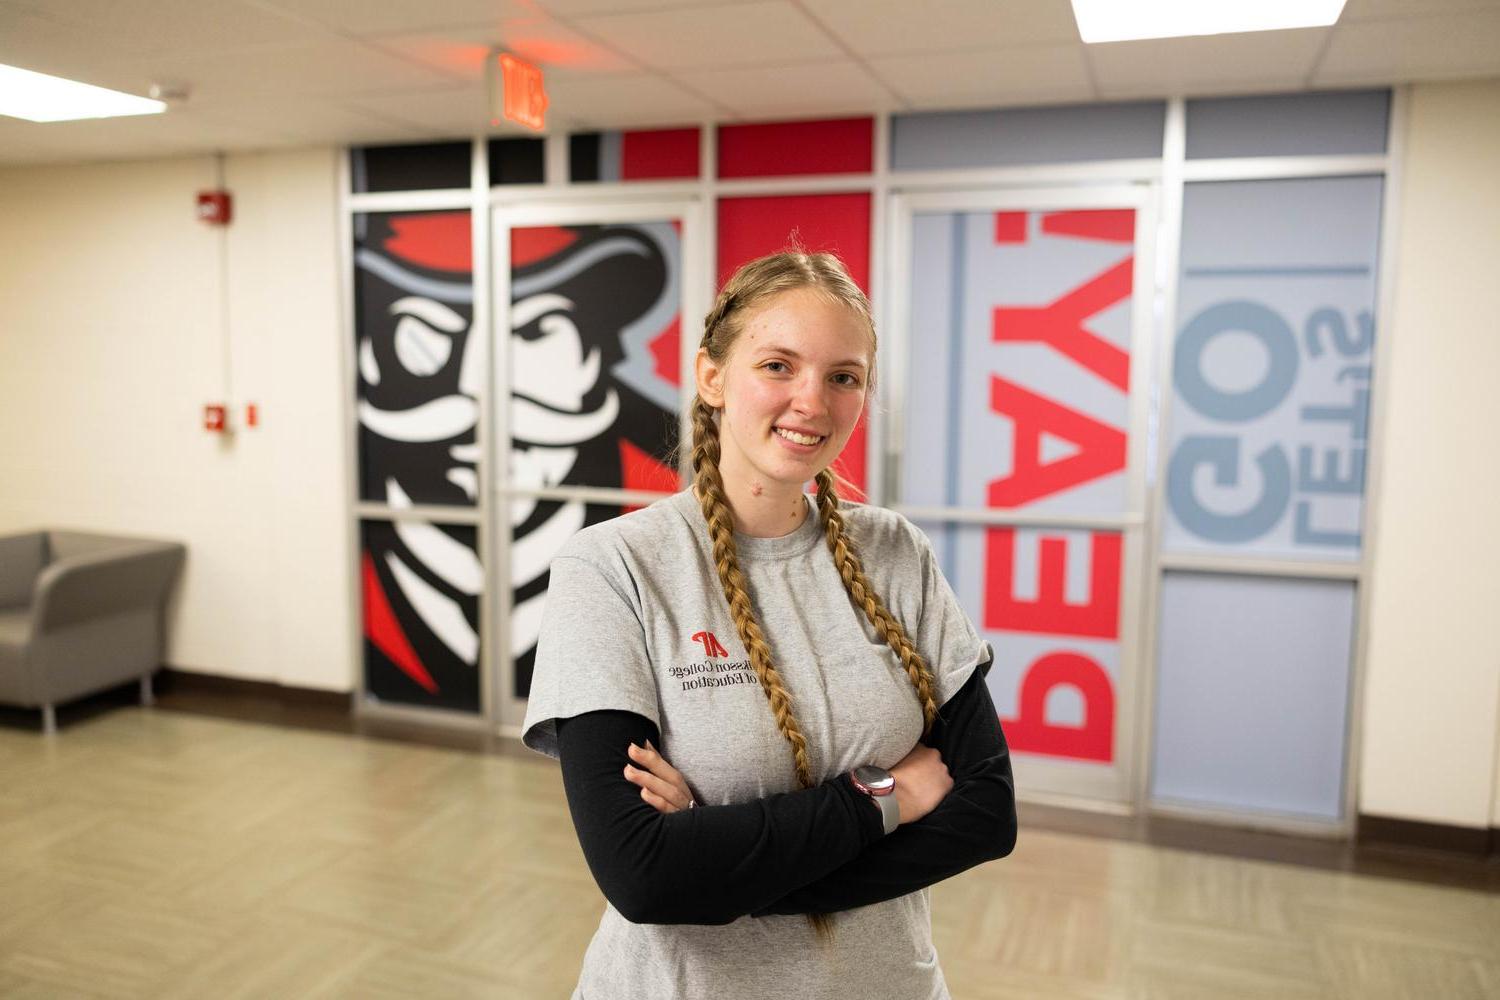 Transfer student Megan Schneck finds purpose, community at Austin Peay